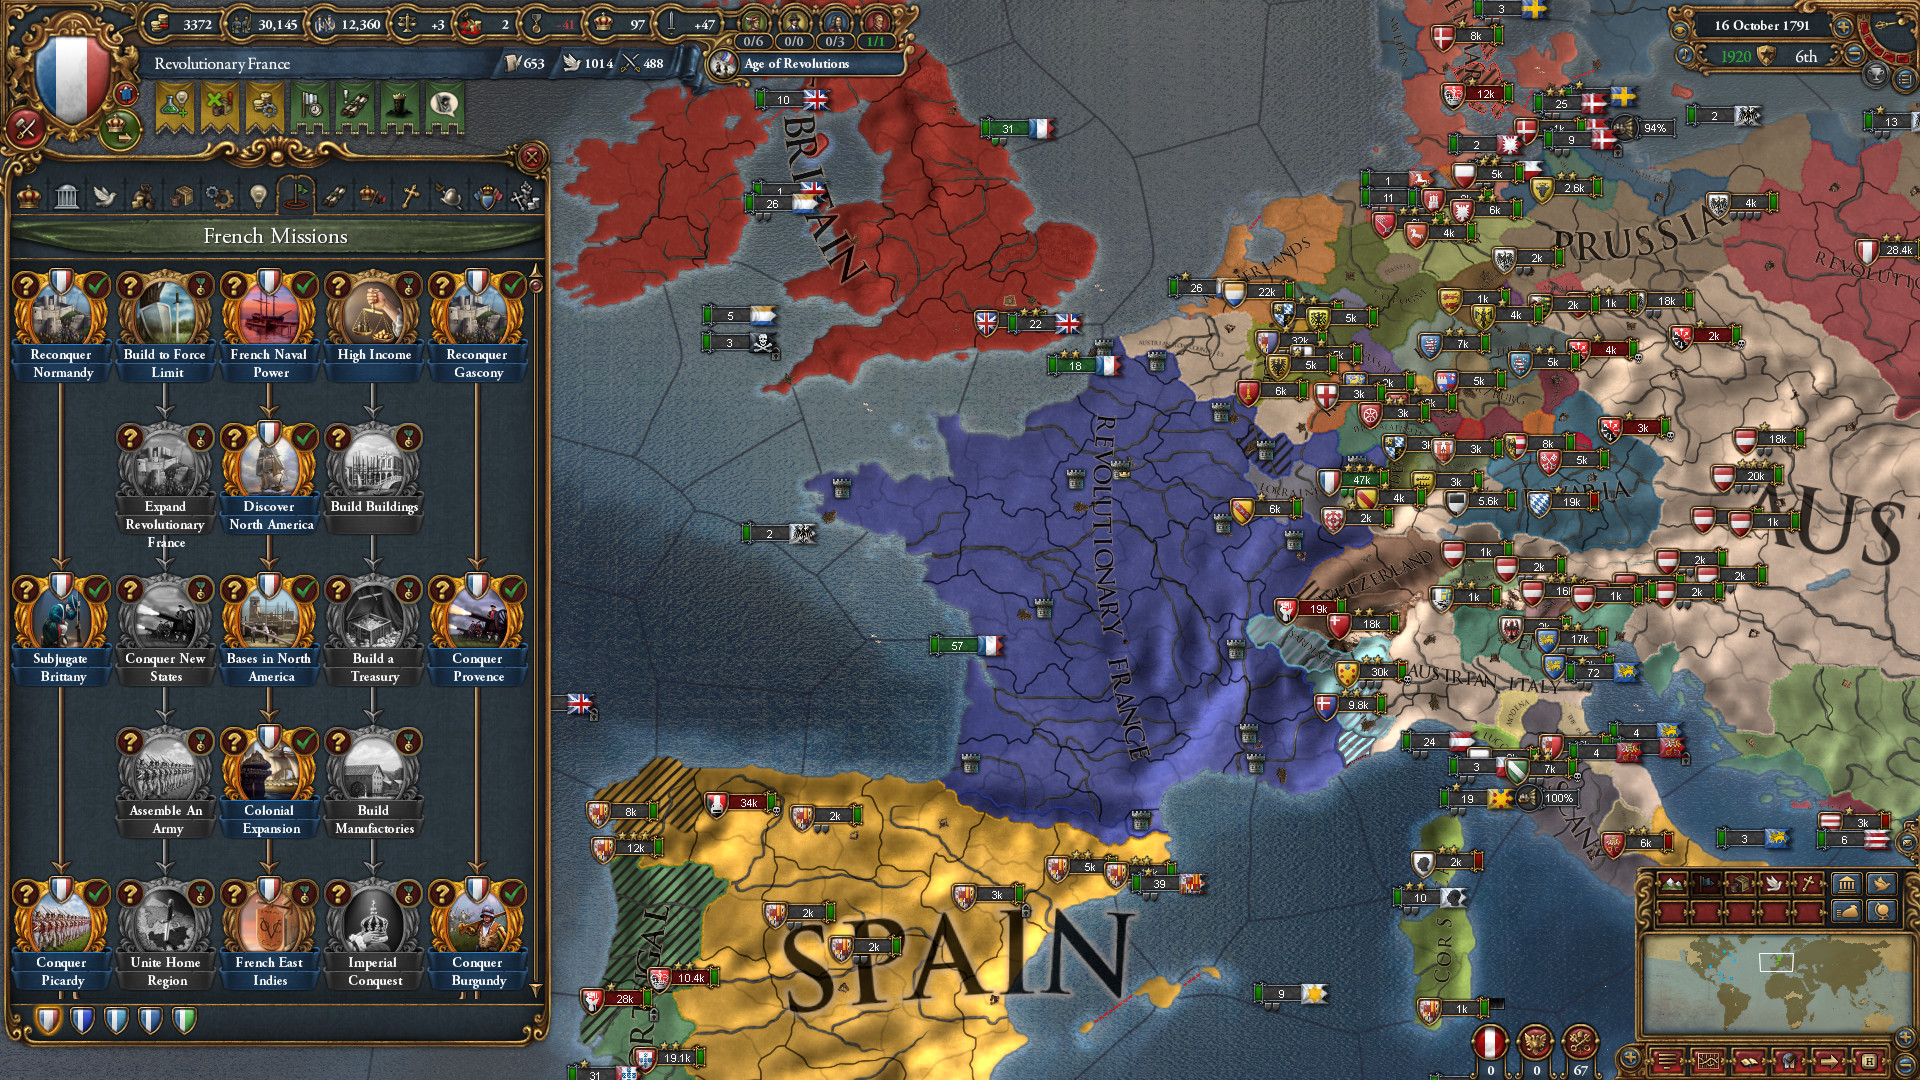 The EU4 subscription launches today, and the Nakama patch is making a